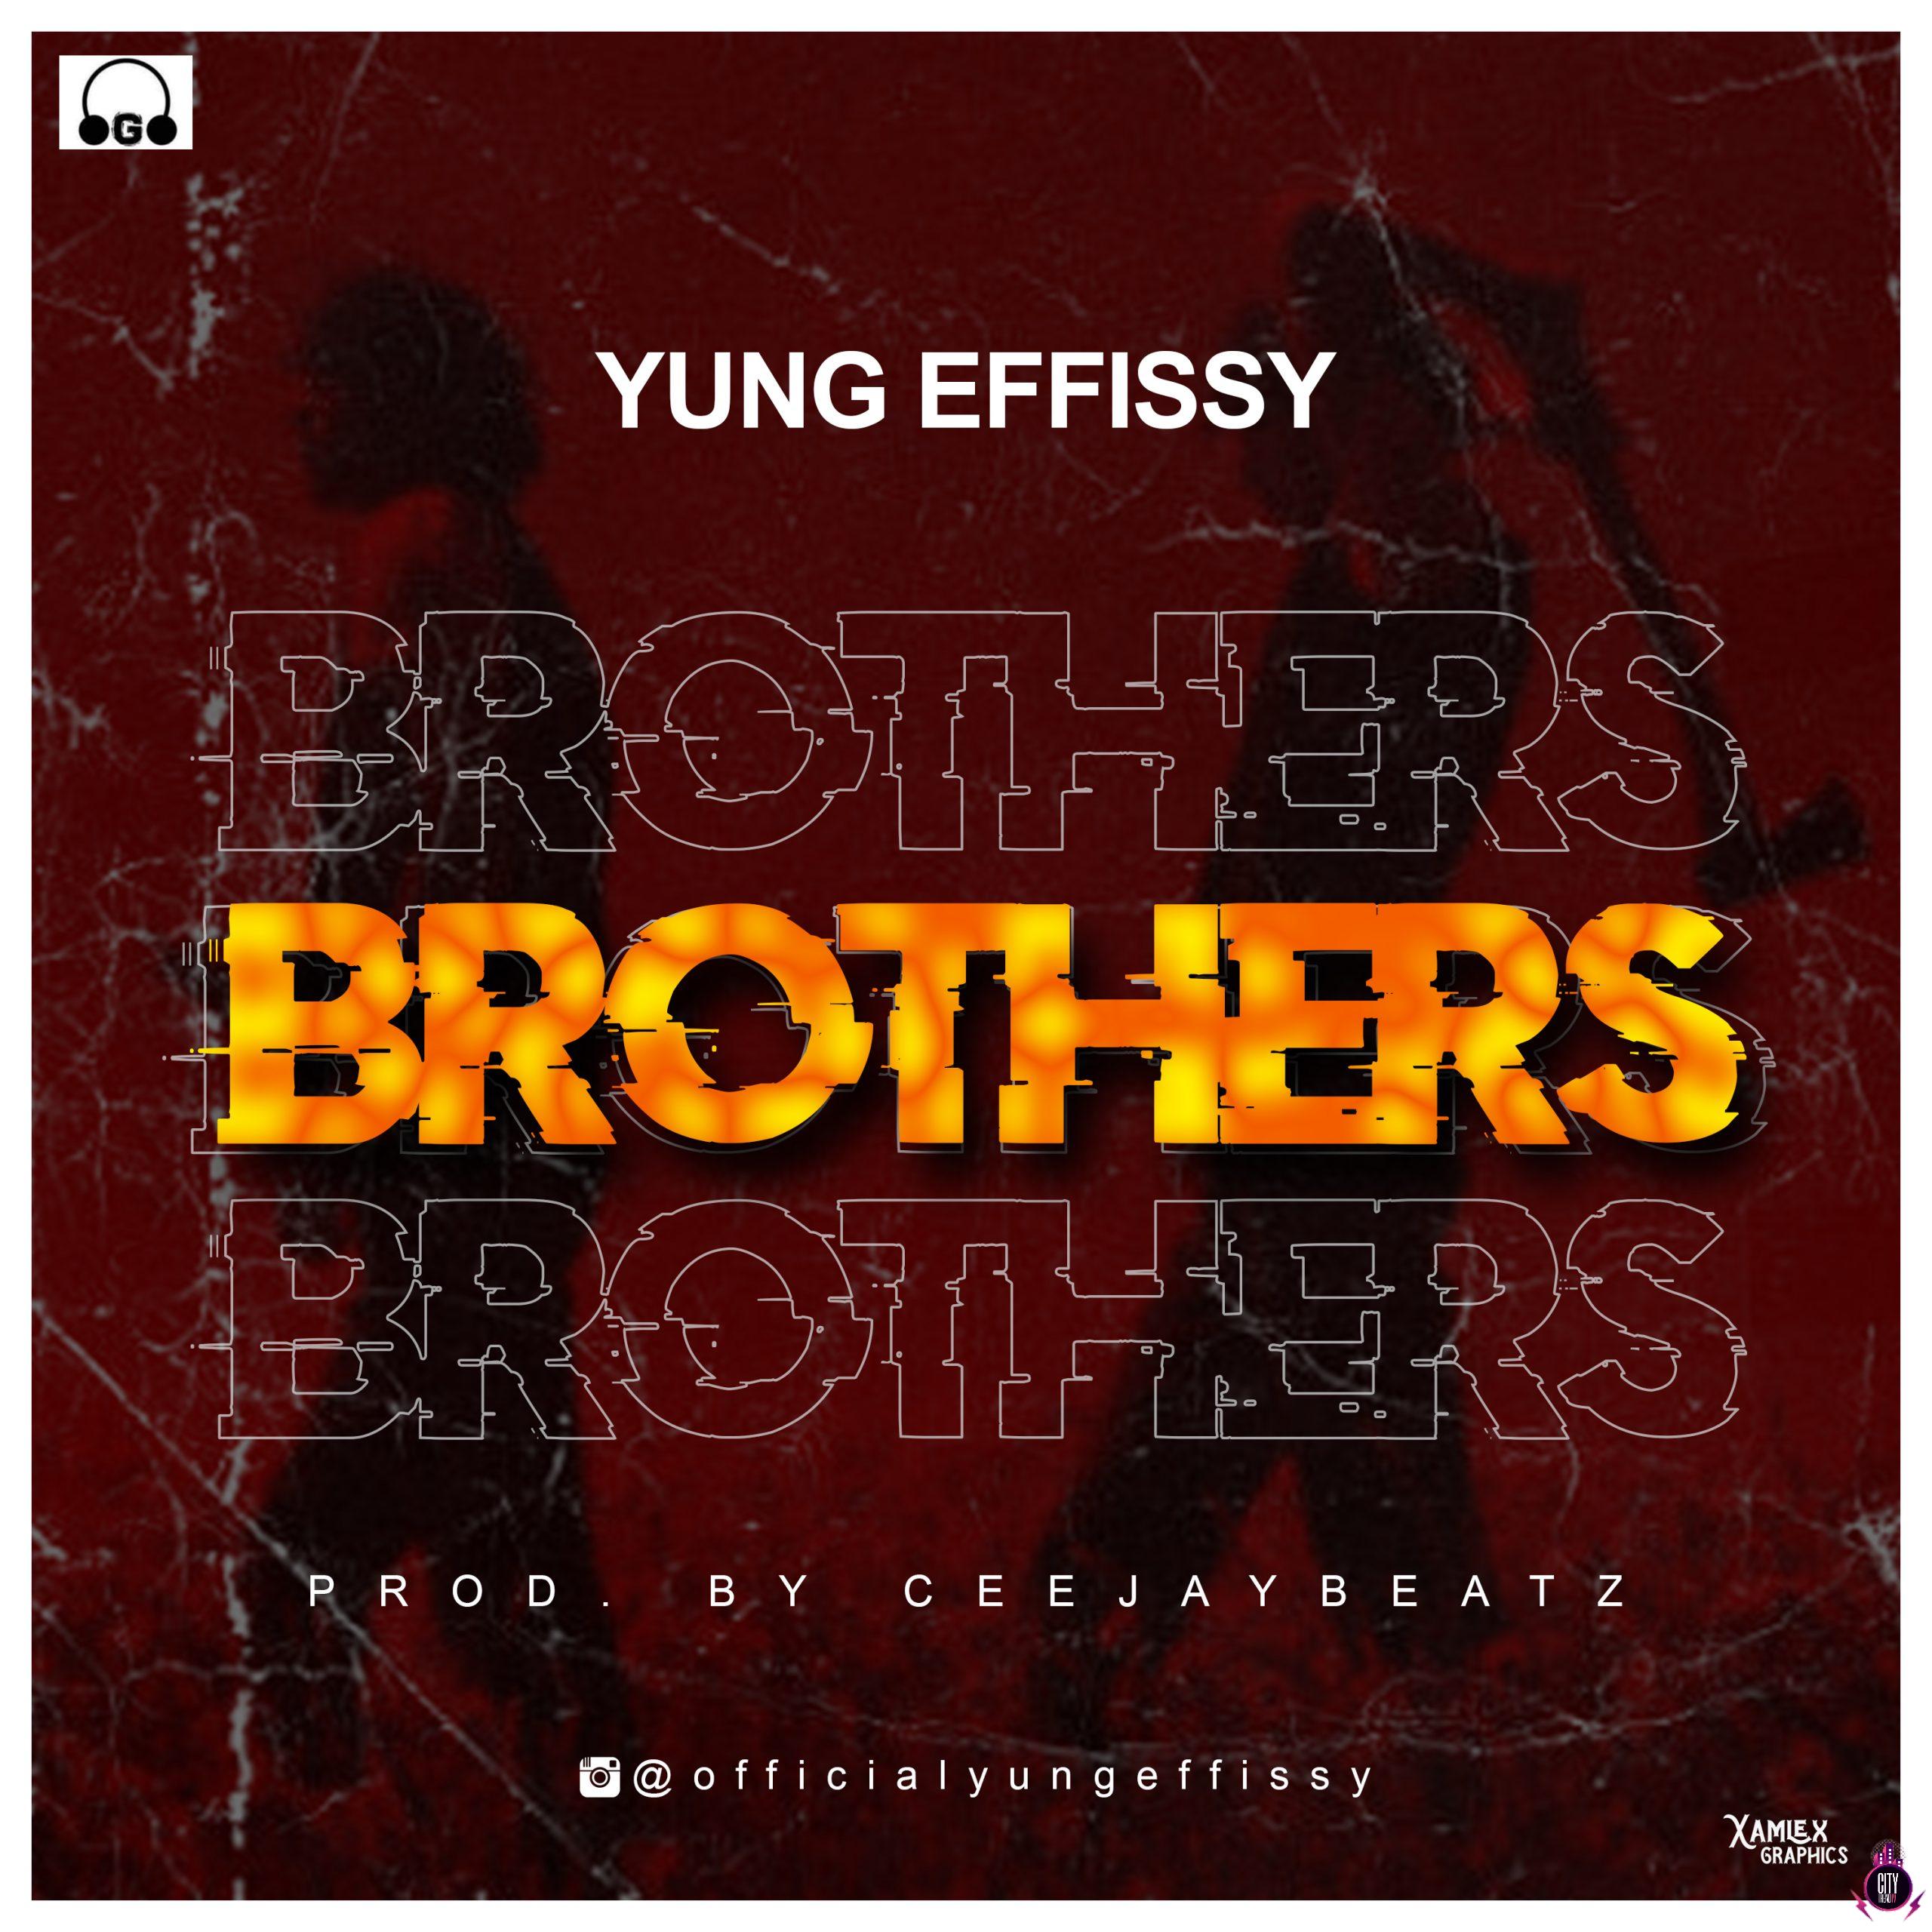 Yung Effissy — Brothers scaled